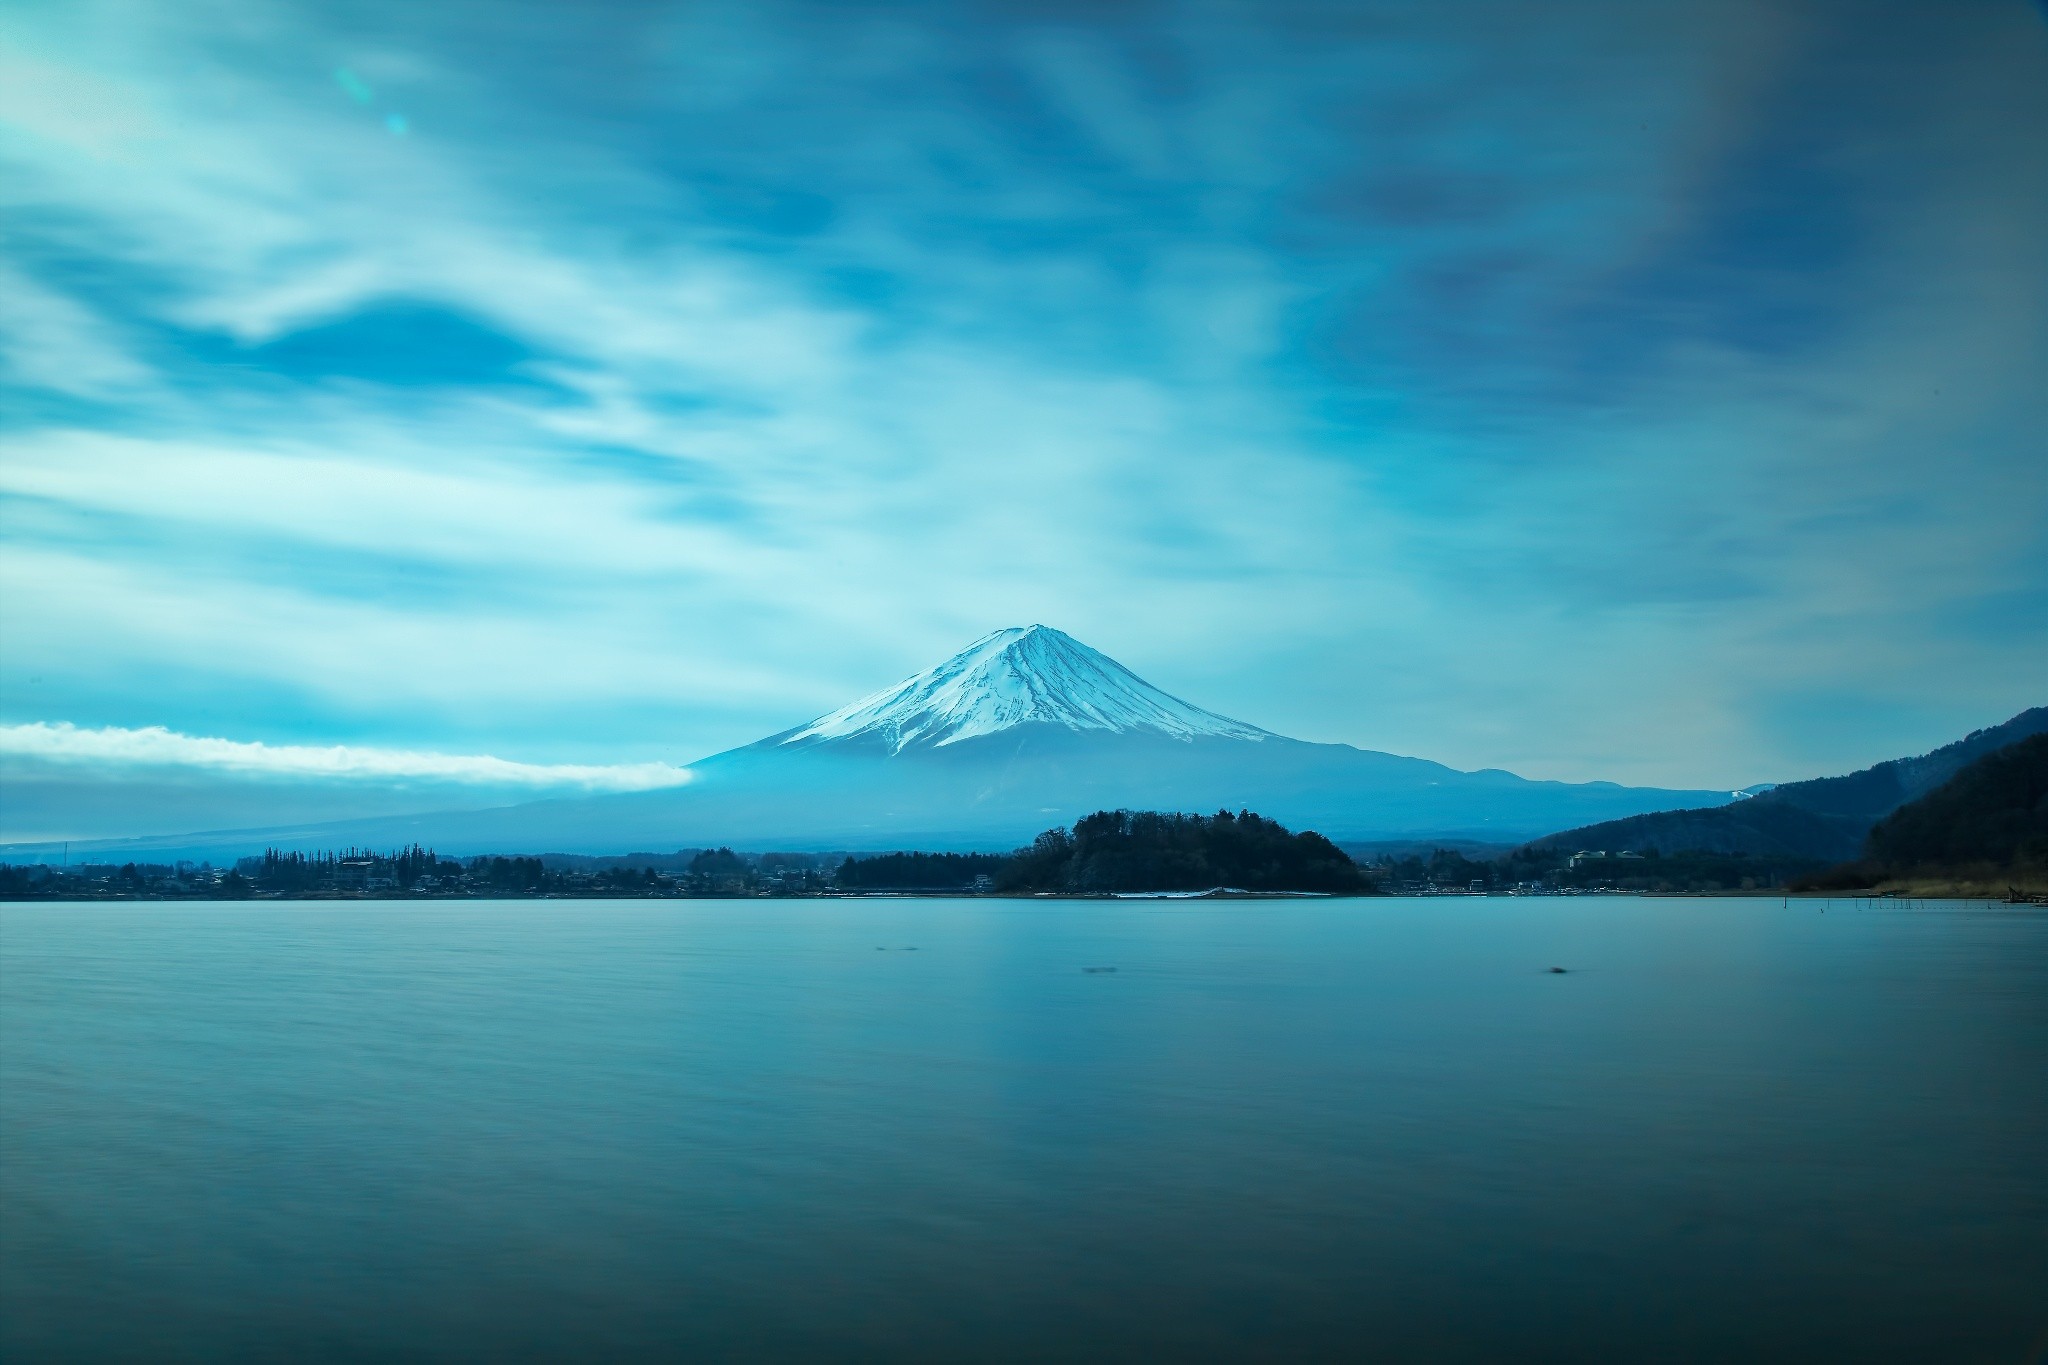 General 2048x1365 500px photography landscape cyan snowy peak volcano water nature sky